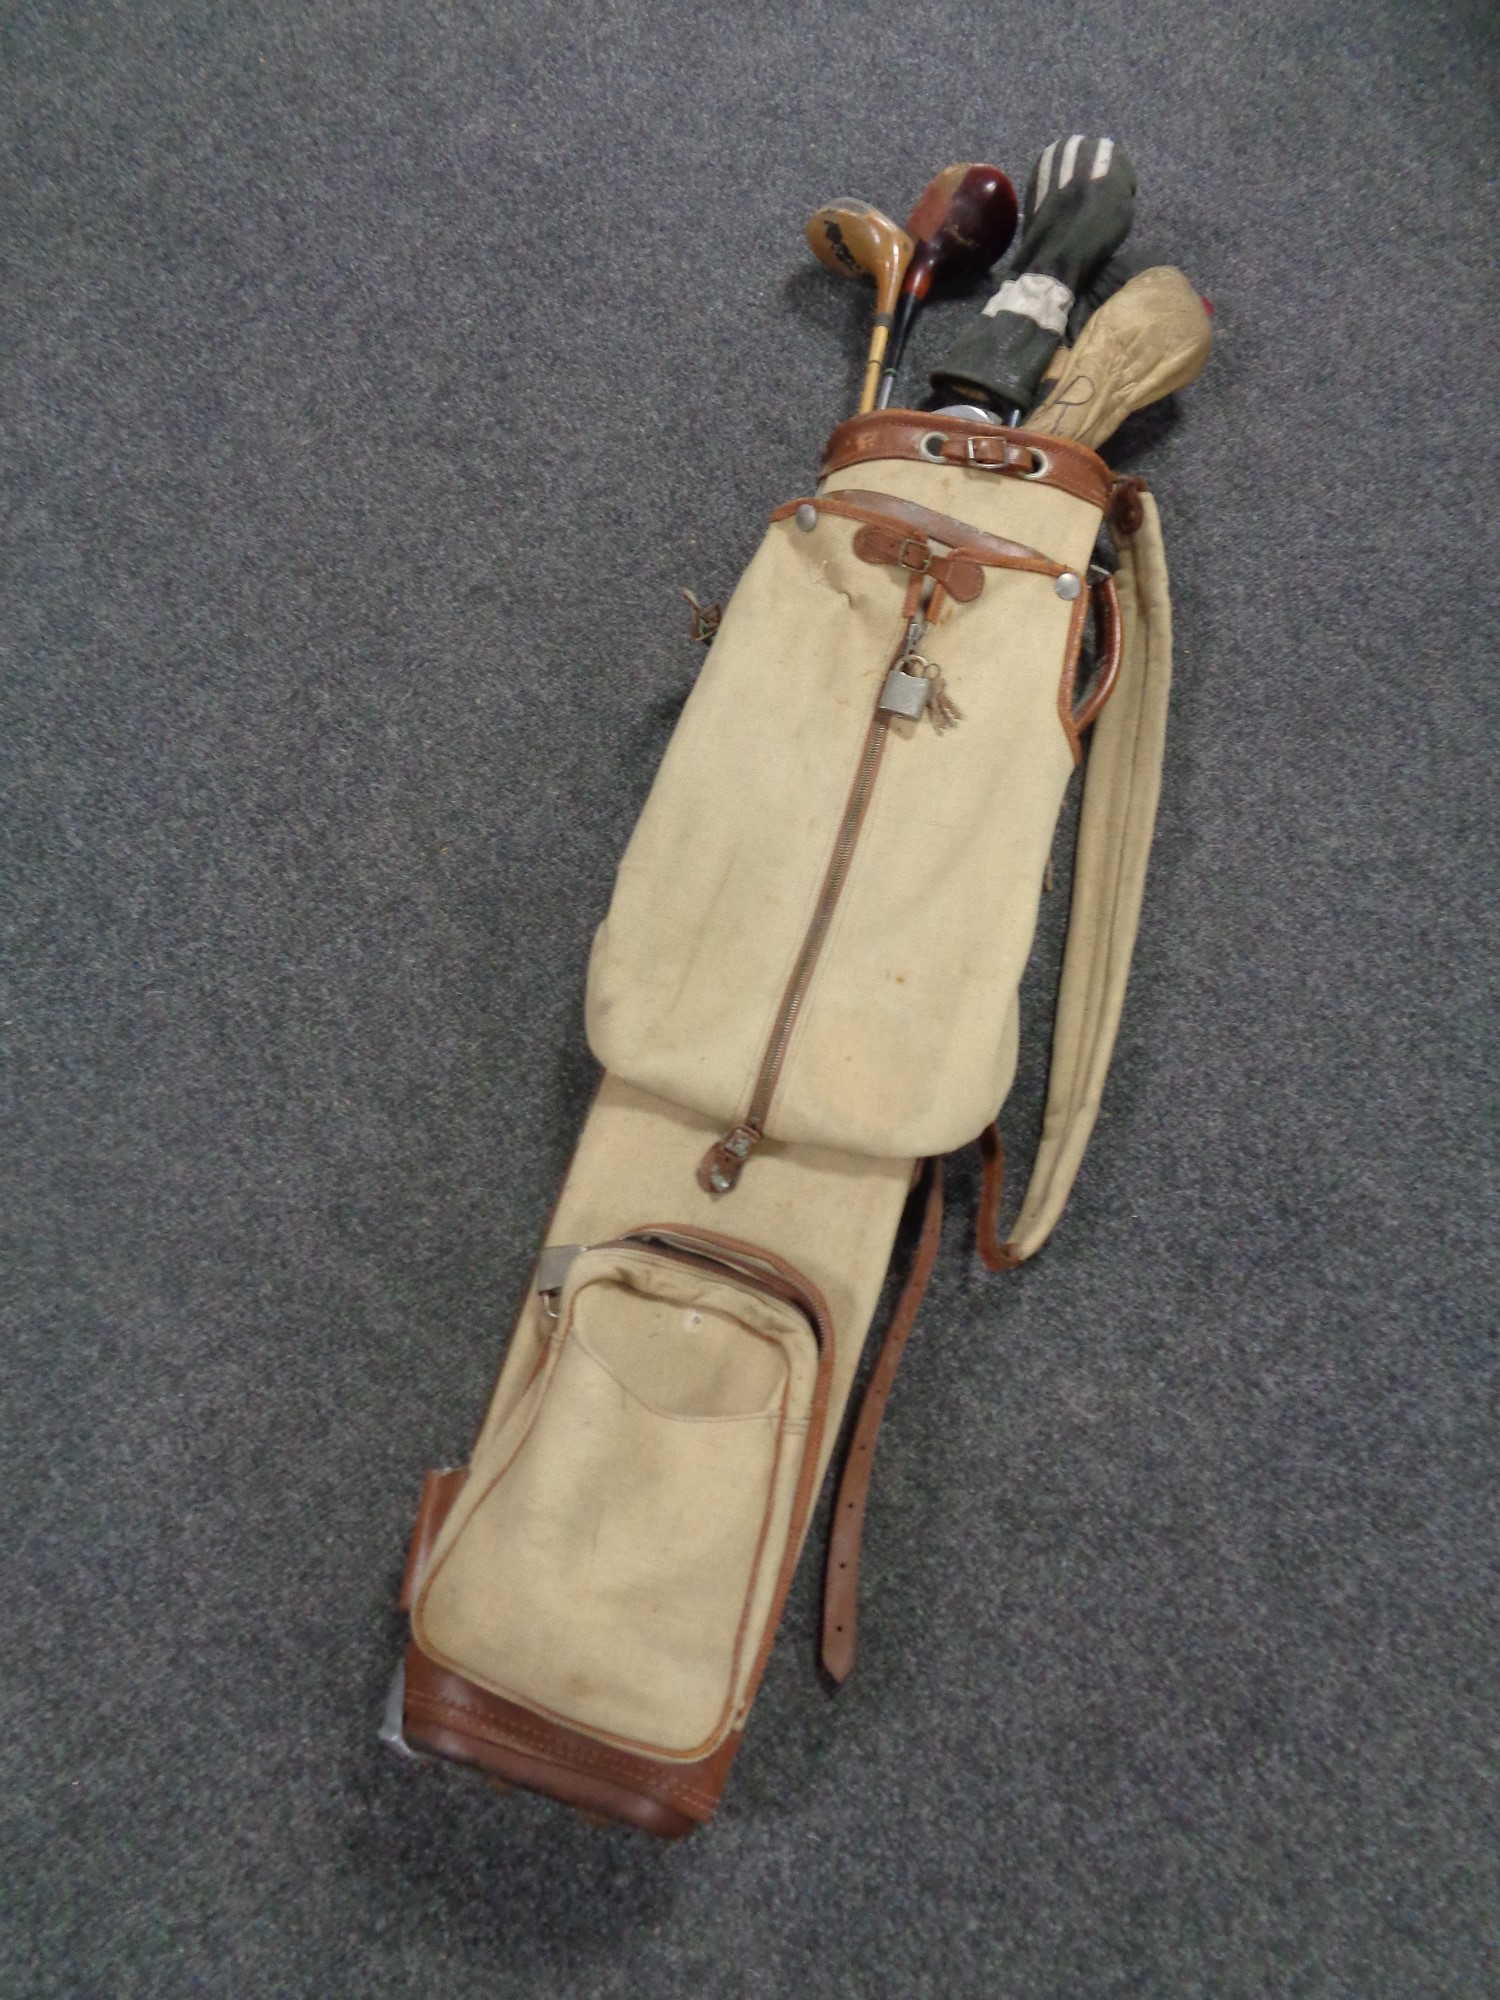 A vintage canvas golf bag containing five vintage drivers and two irons.